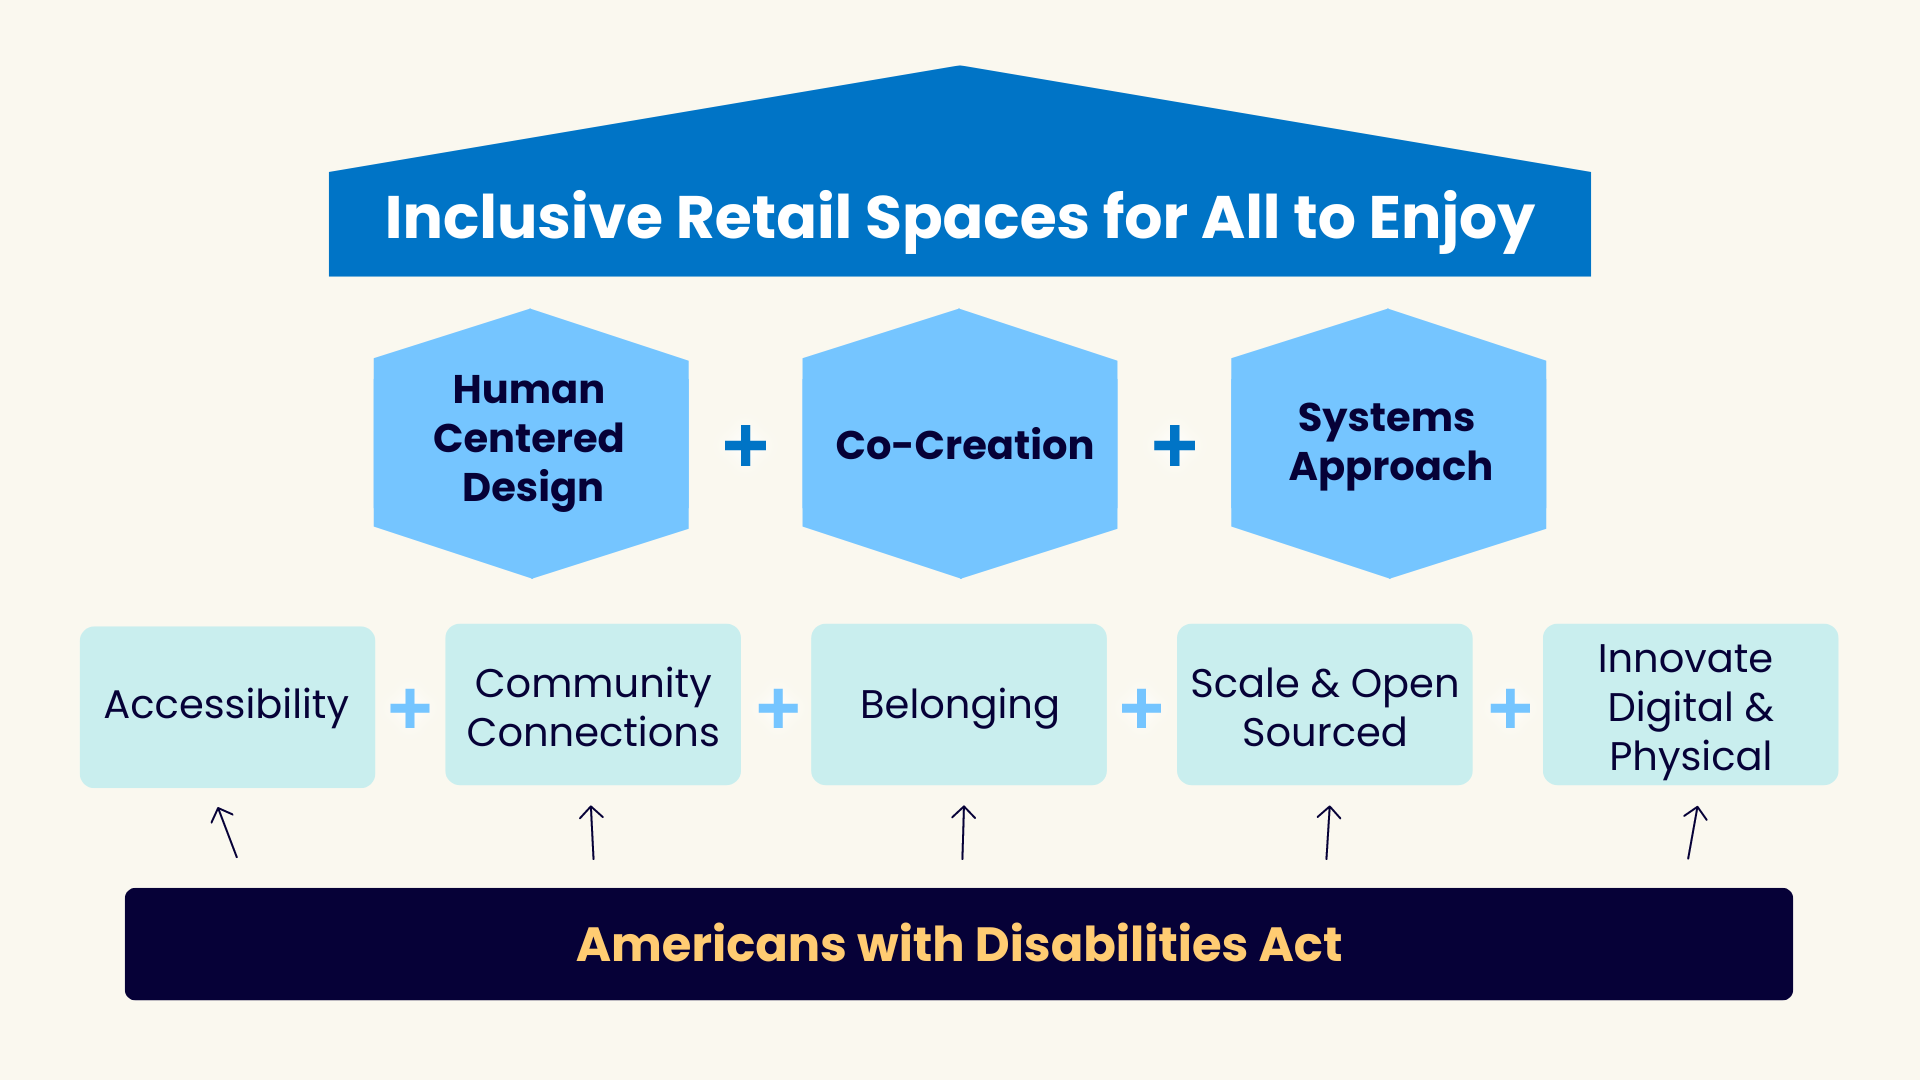 An infographic titled 'Inclusive Retail Spaces for All to Enjoy.' It features three main blue hexagons with the words 'Human Centered Design,' 'Co-Creation,' and 'Systems Approach,' connected with plus signs. Below these, there are five smaller blue boxes labeled 'Accessibility,' 'Community Connections,' 'Belonging,' 'Scale & Open Sourced,' and 'Innovate Digital & Physical,' also connected with plus signs. All these elements point to a dark blue box at the bottom labeled 'Americans with Disabilities Act.'